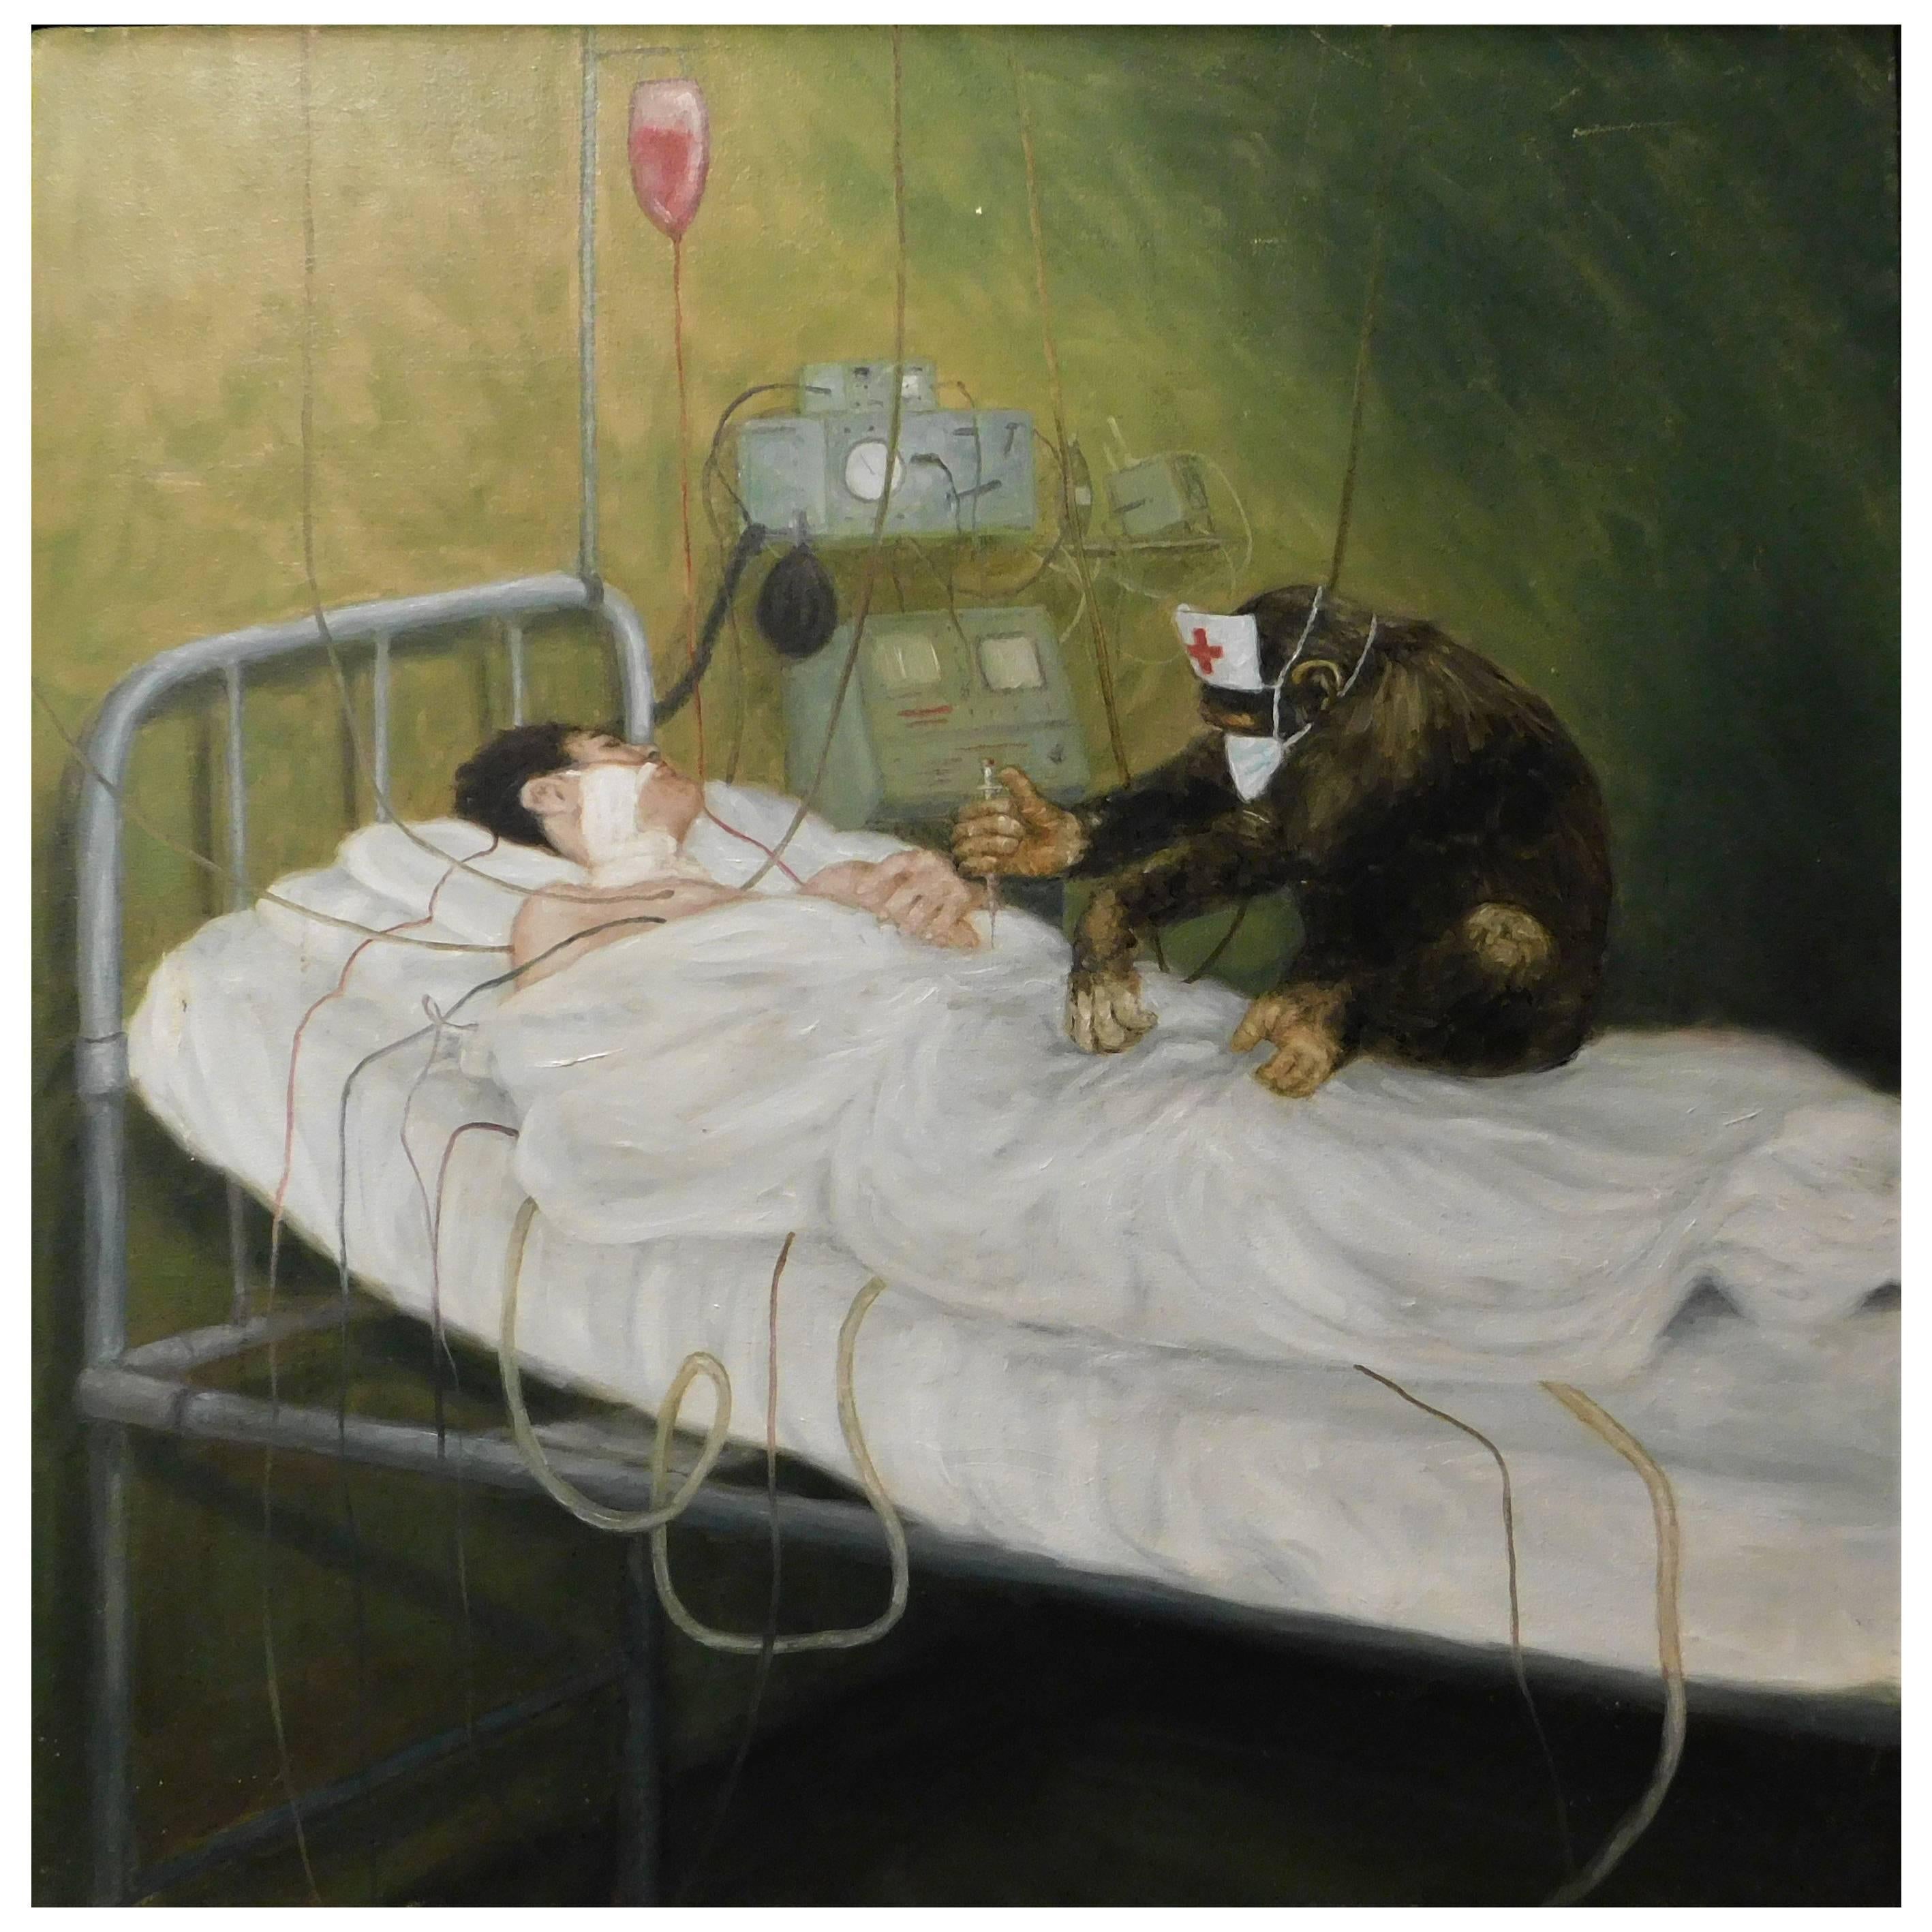 Science Fiction Painting with Monkey Nurse Treating Patient